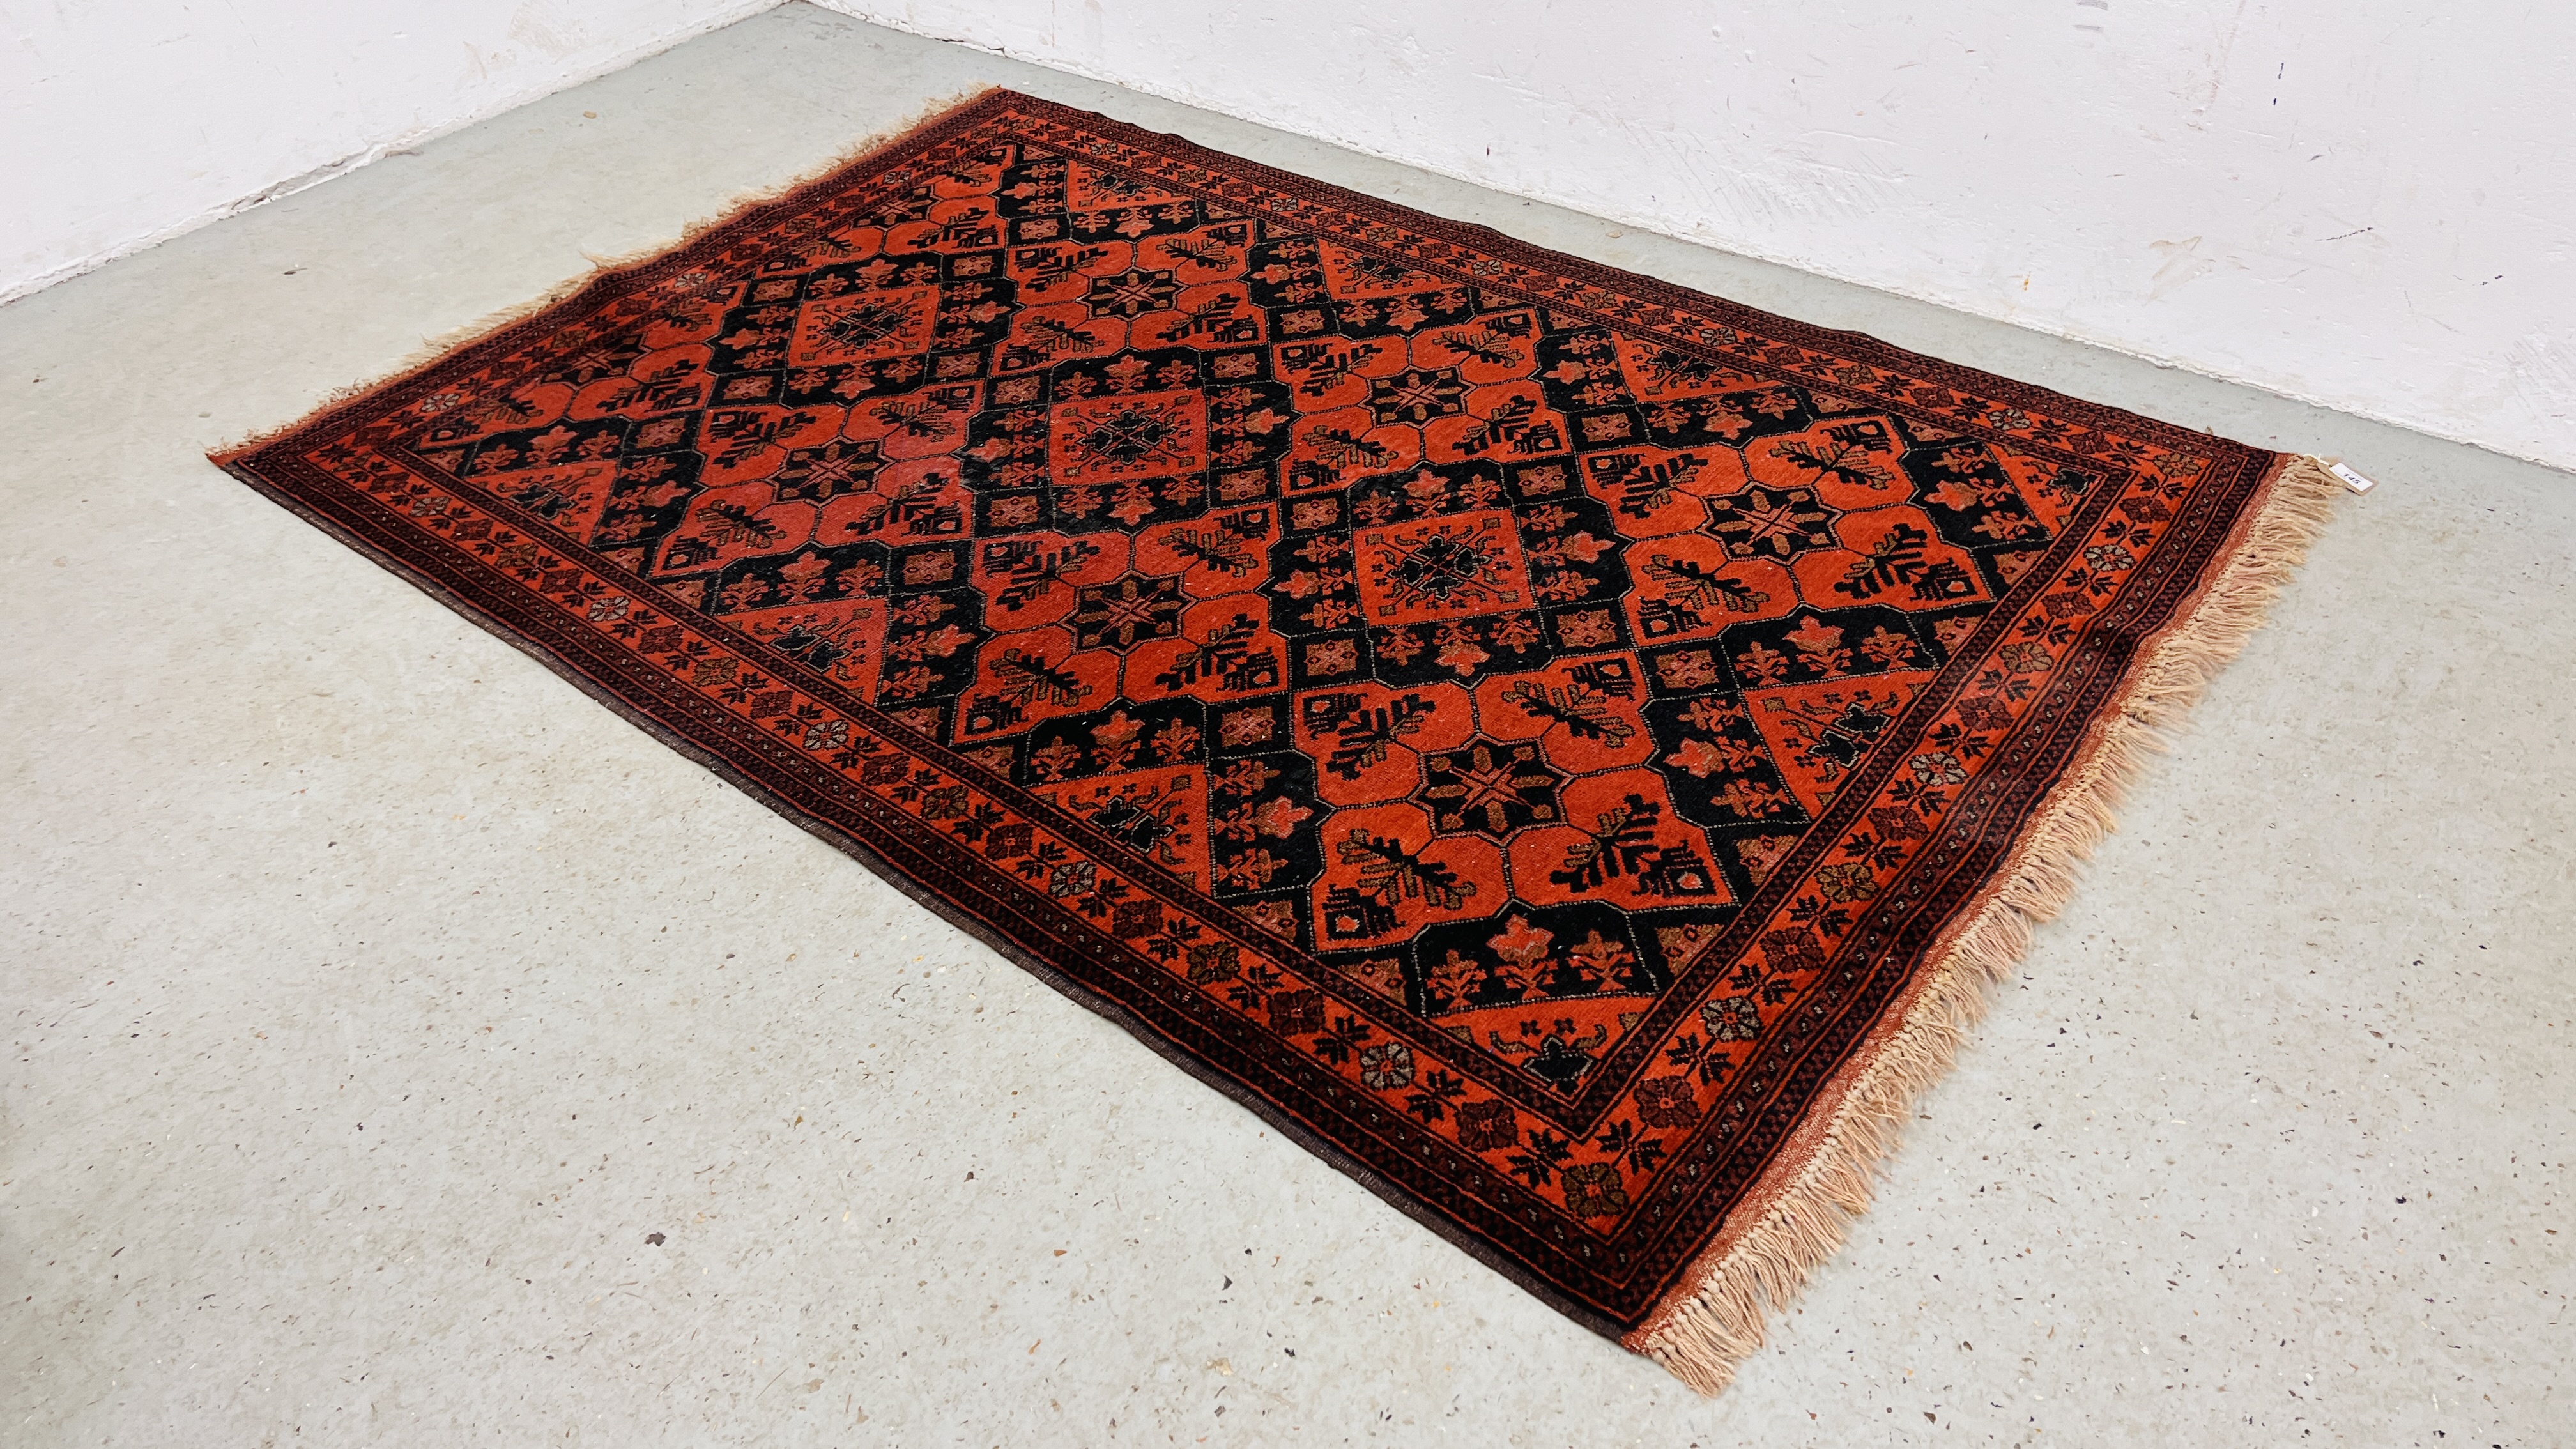 A RED PATTERNED EASTERN RUG.